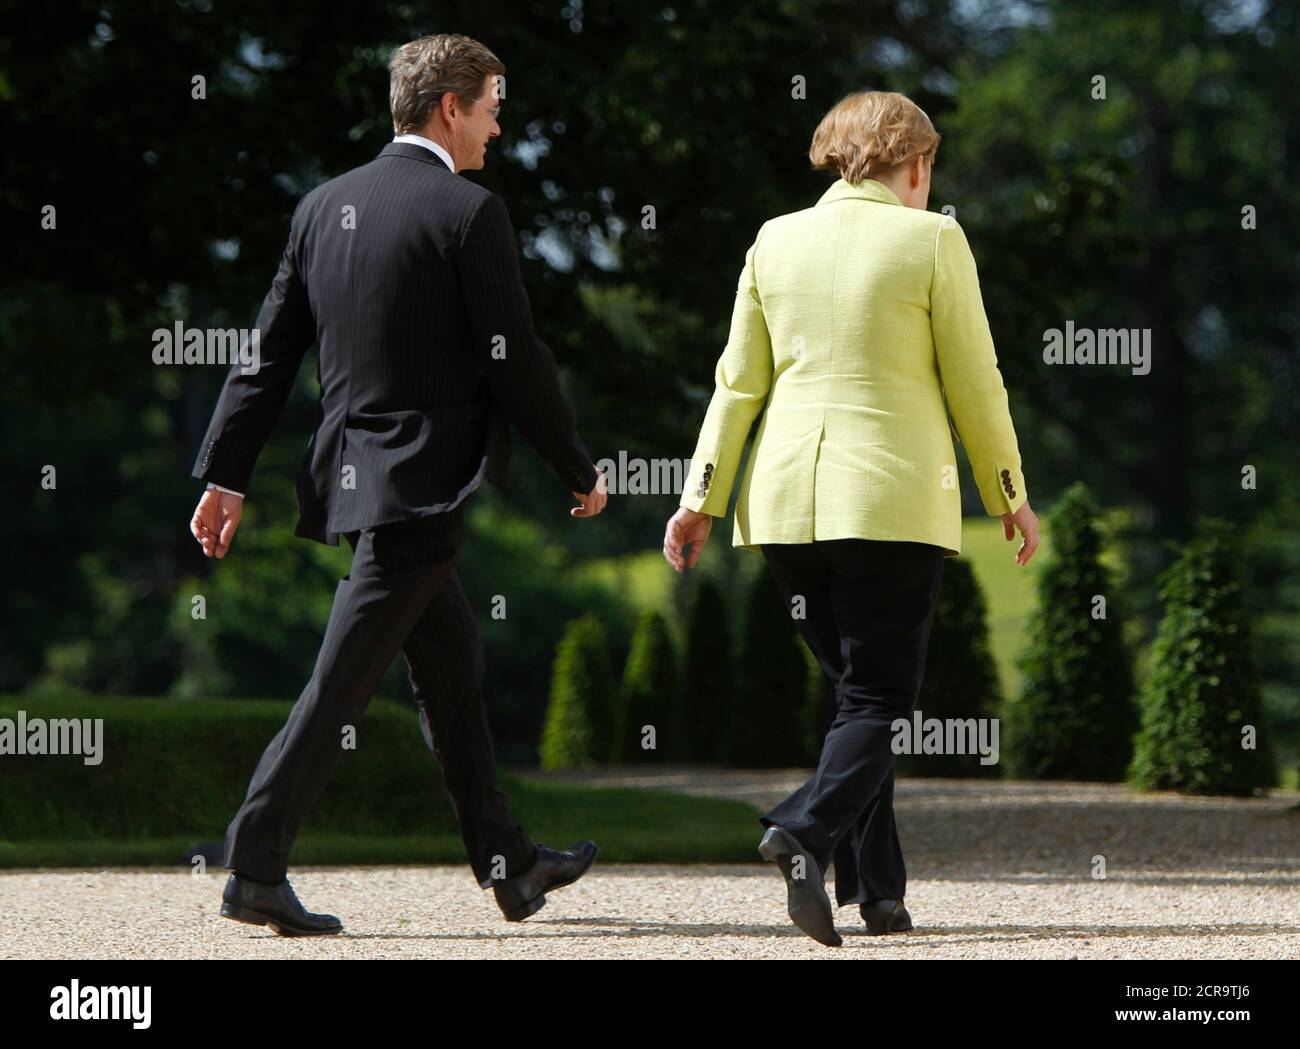 German Chancellor Angela Merkel (R) and Foreign Minister and Vice-Chancellor Guido Westerwelle leave a press briefing to attend a meeting with leading representatives of the economy and trade unions at the government guest house Schloss Meseberg, some 70 kilometres (43.5 miles) north of Berlin, June 18, 2010. REUTERS/Thomas Peter  (GERMANY - Tags: POLITICS) Stock Photo